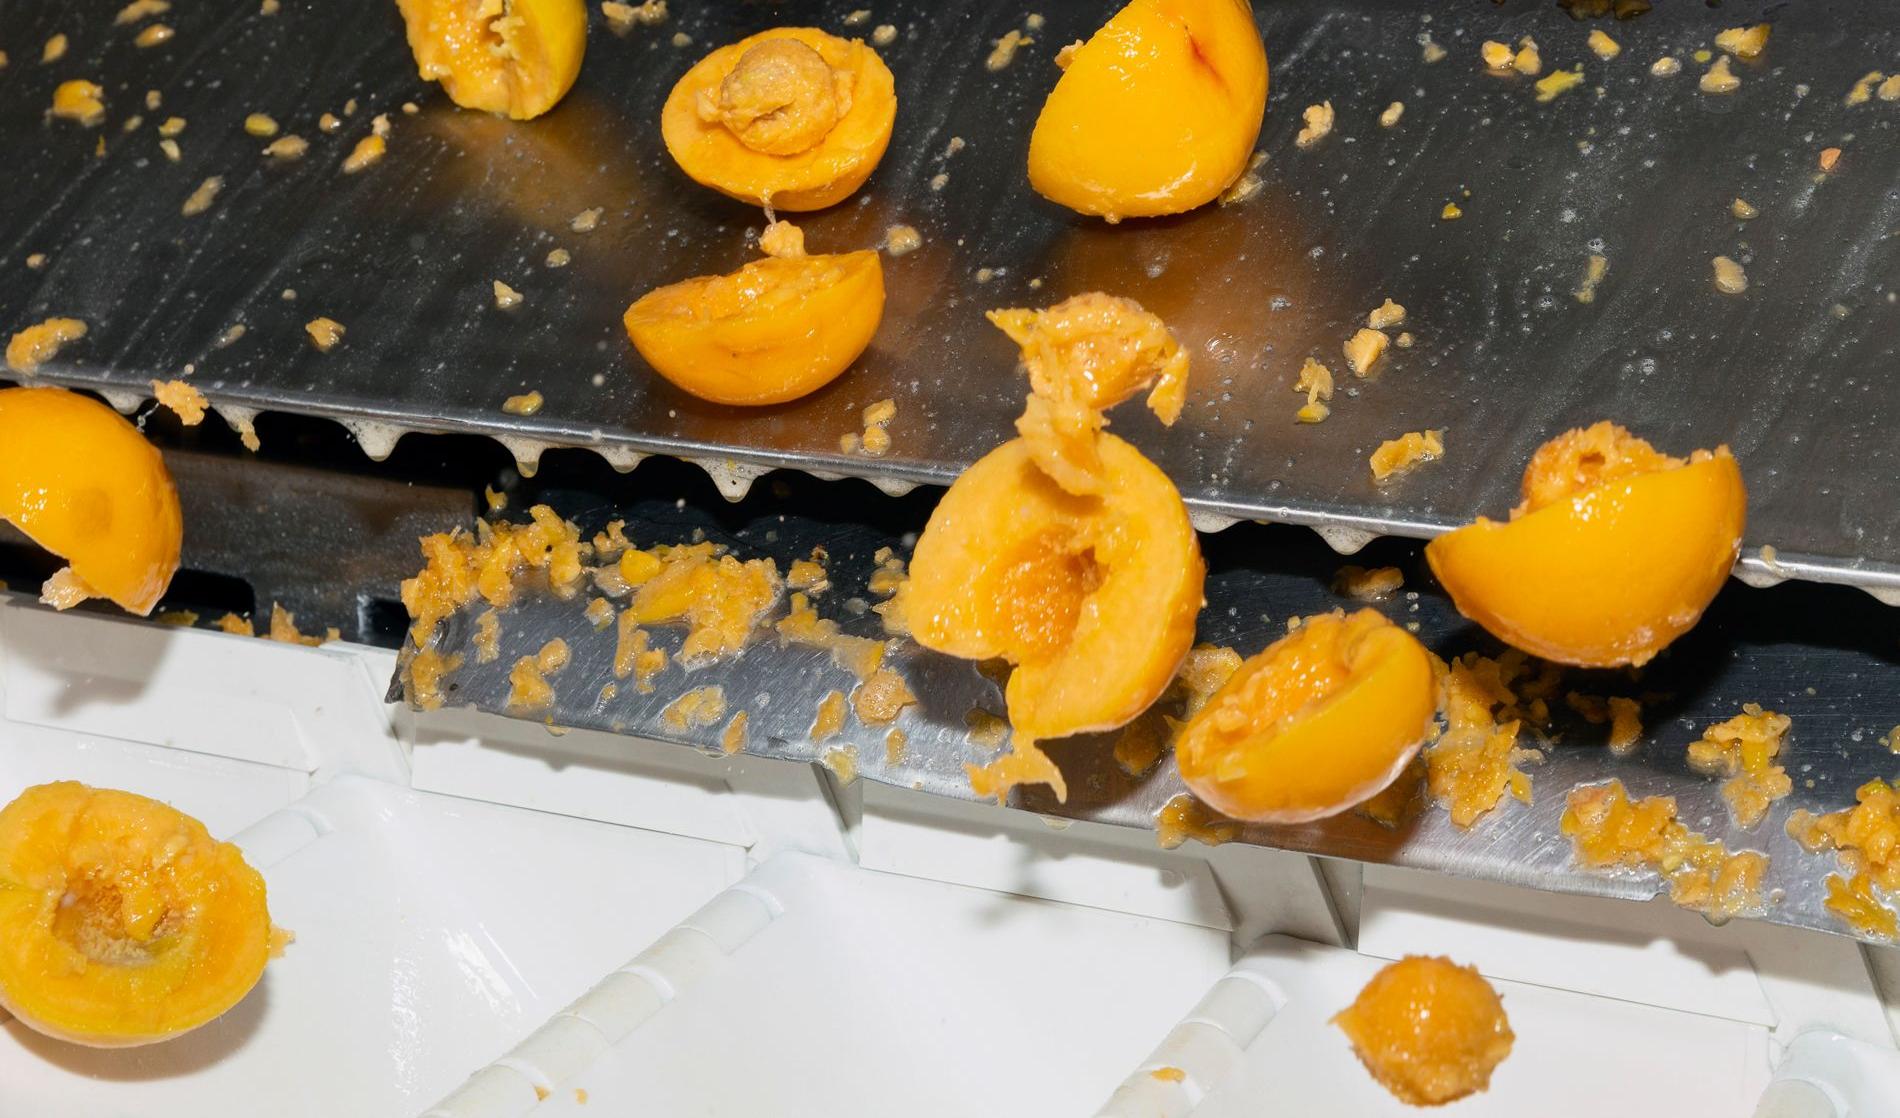 Peeled Peaches are falling down a metal slide in a factory.